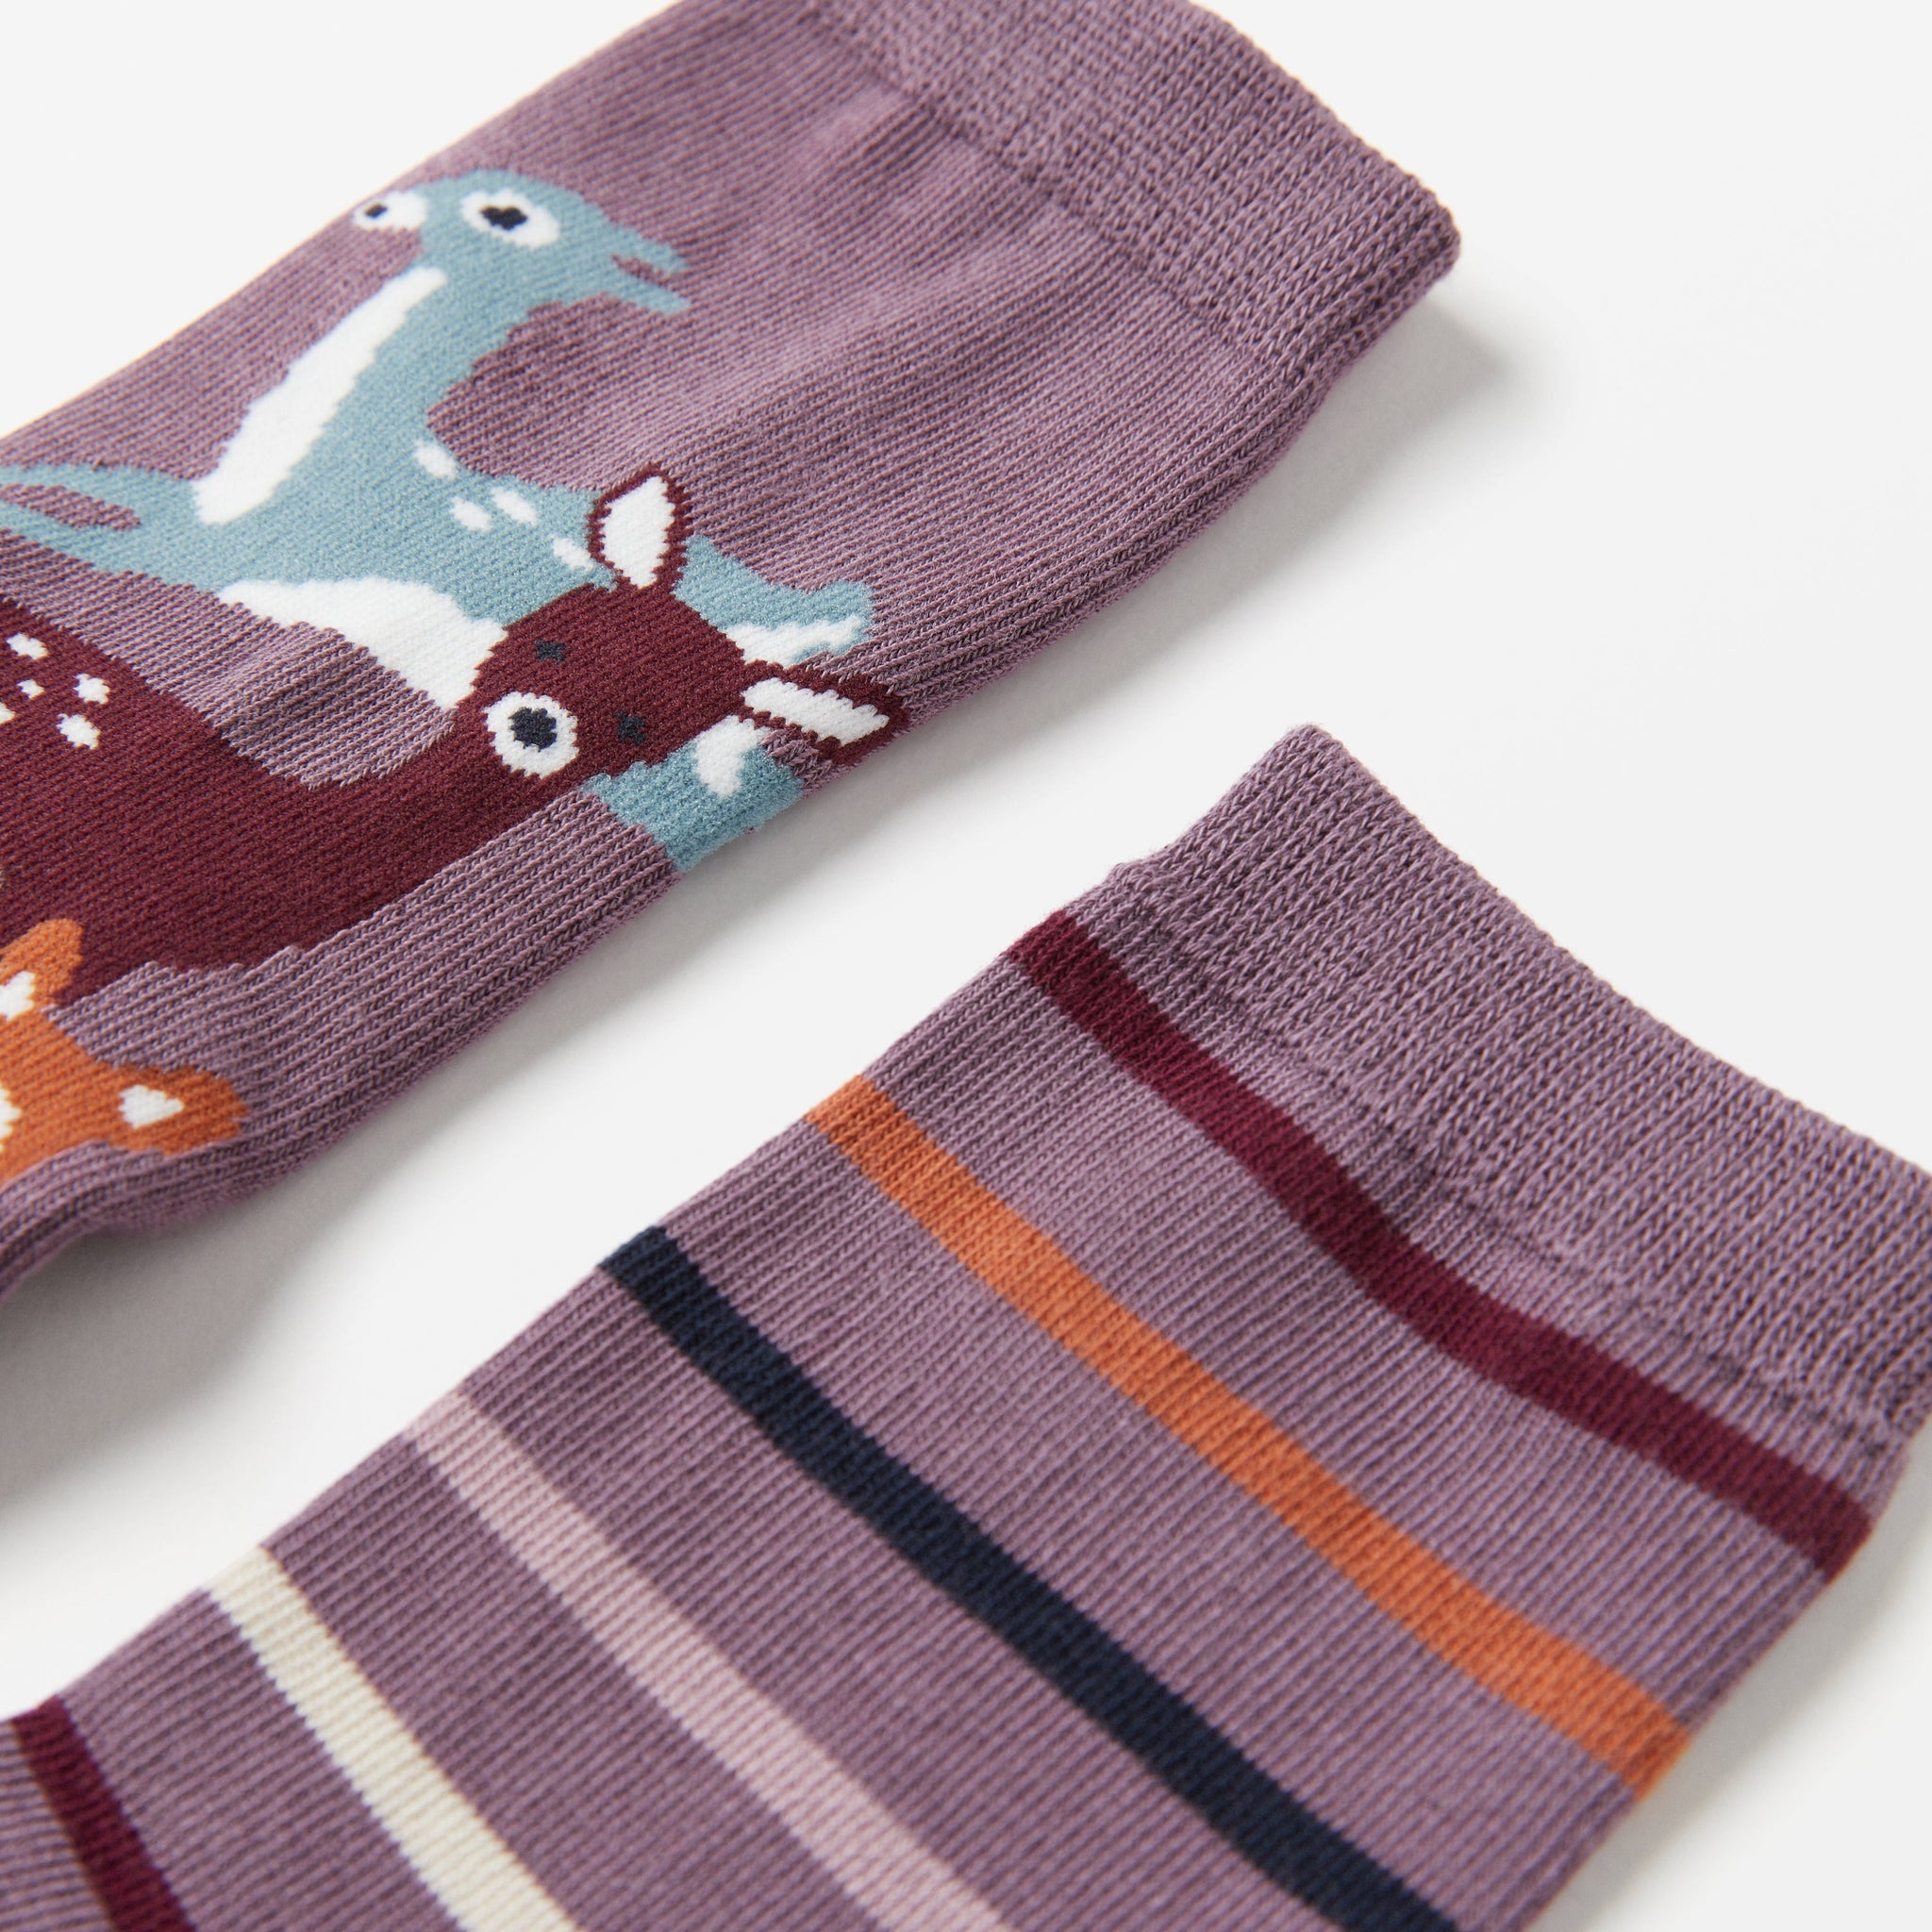 Purple Kids Socks Multipack from the Polarn O. Pyret kidswear collection. The best ethical kids clothes